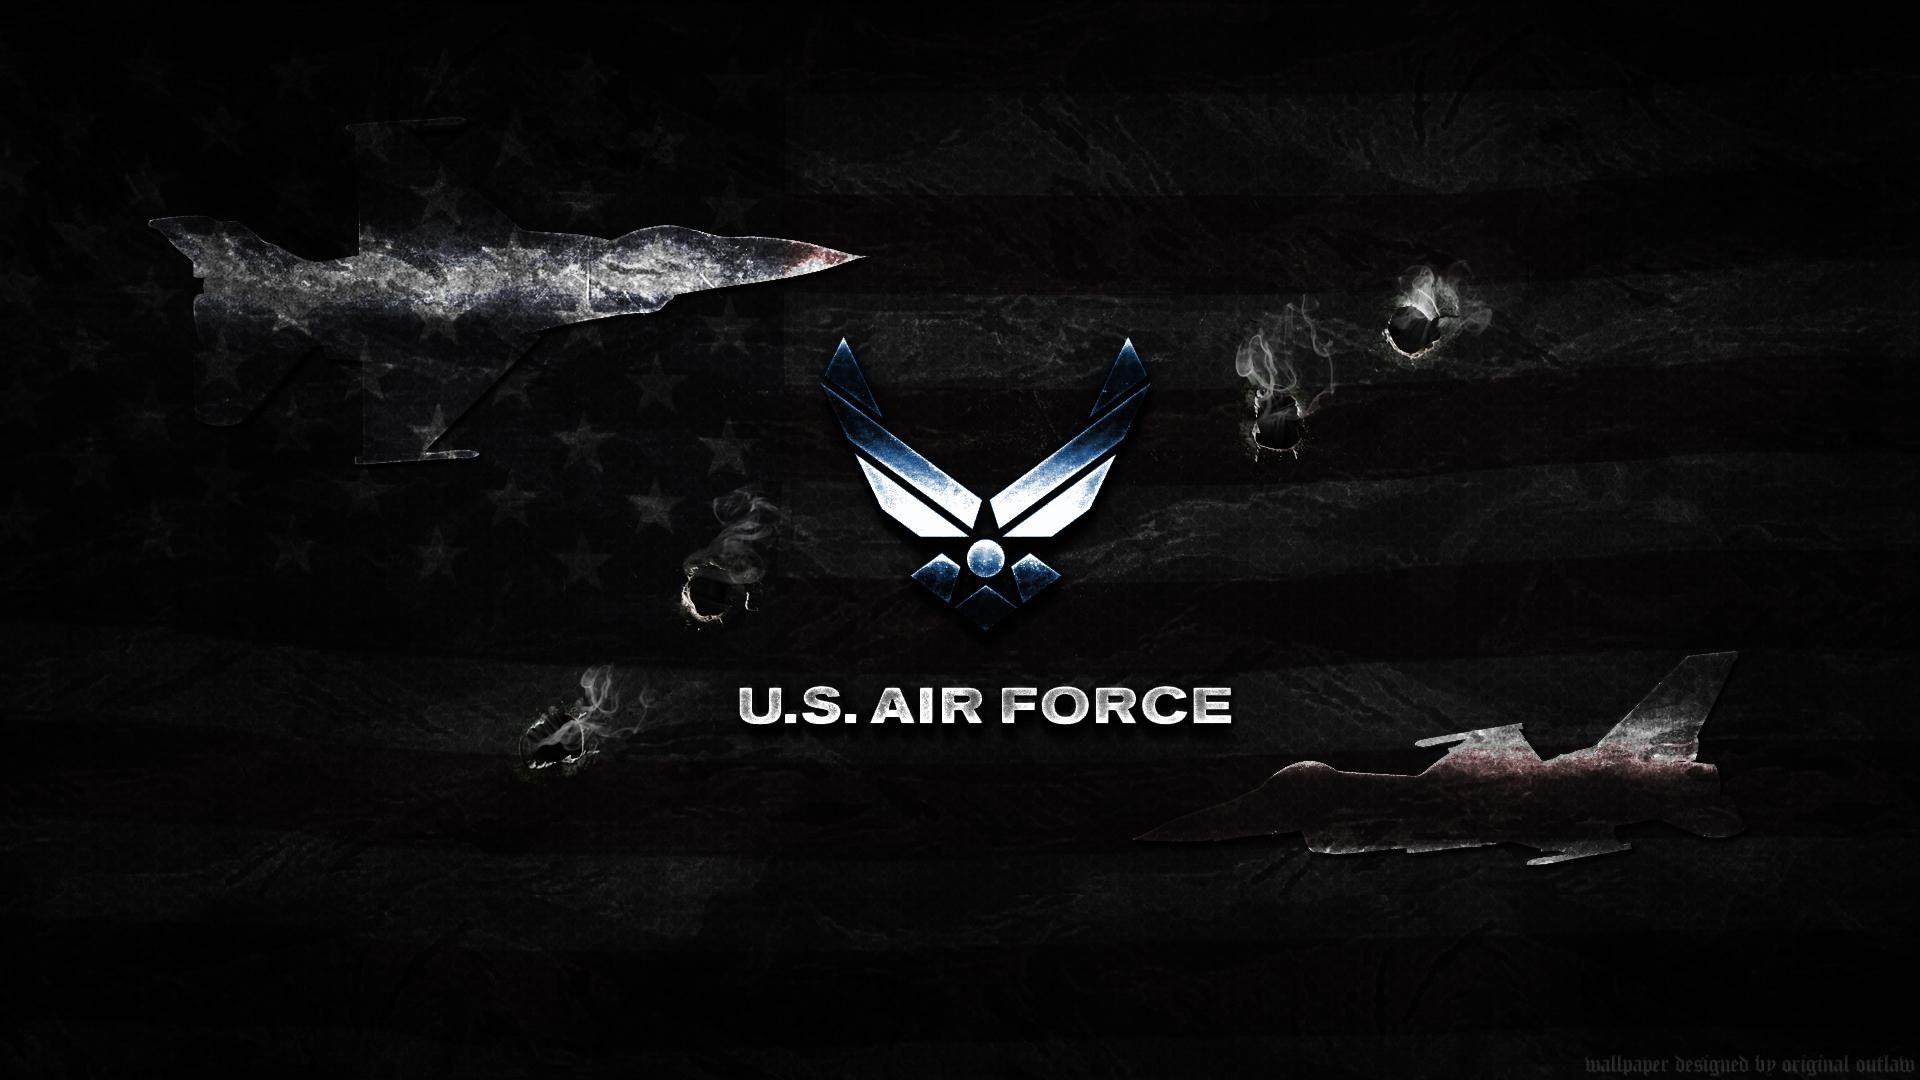  Best Air Force Desktop Backgrounds FULL HD For PC